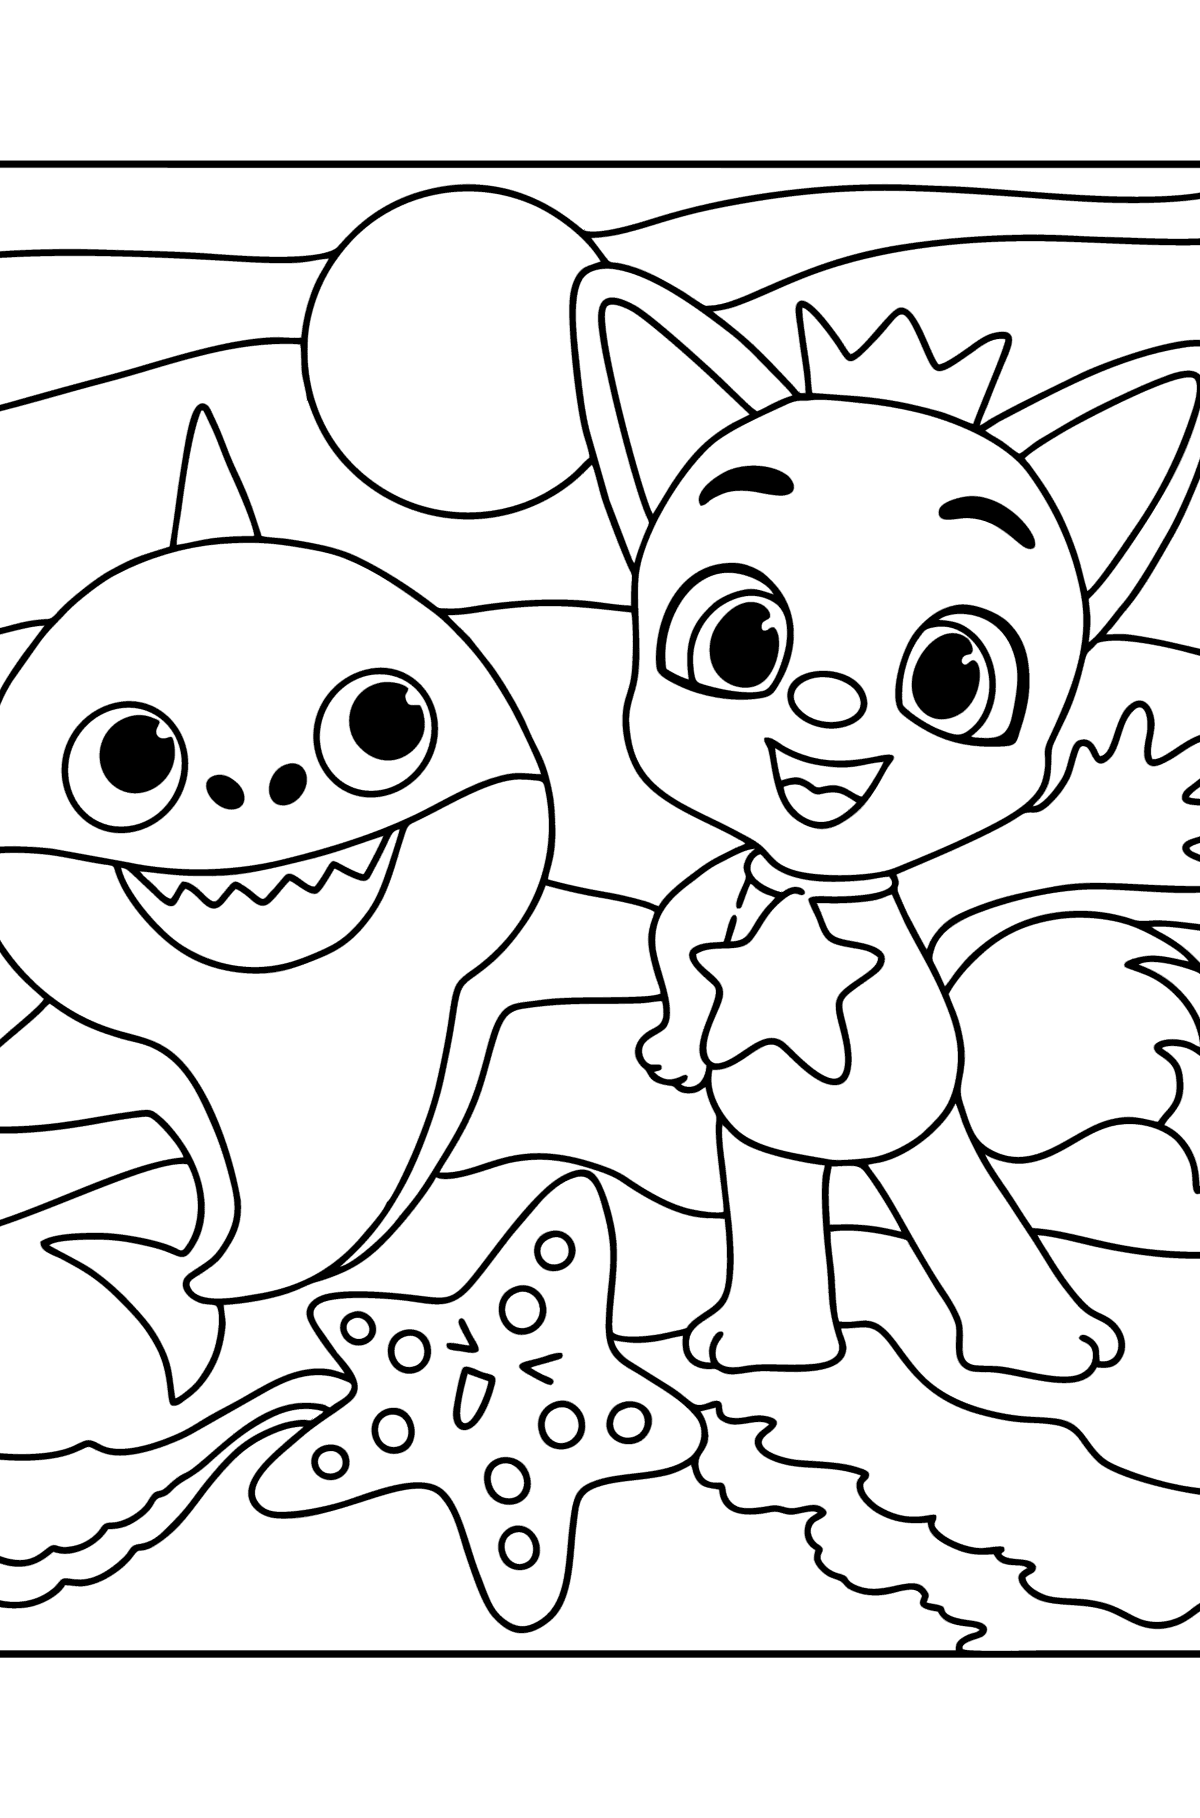 Pinkfong Baby shark coloring page - Coloring Pages for Kids